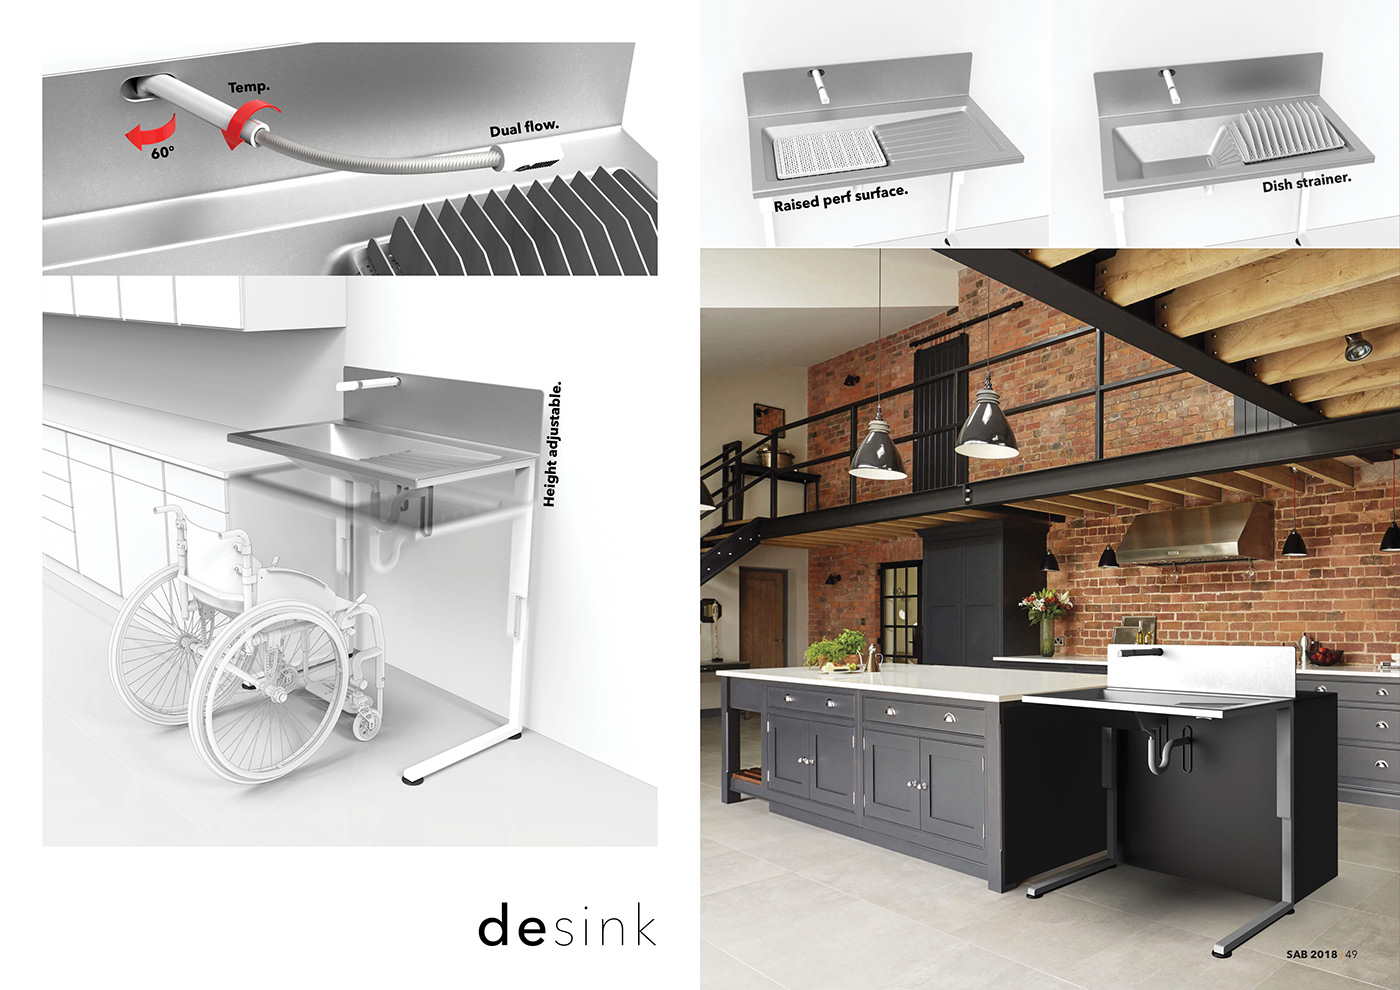 industrial design  product design  study abroad open kitchen cad sketching student germany berlin inclusive design